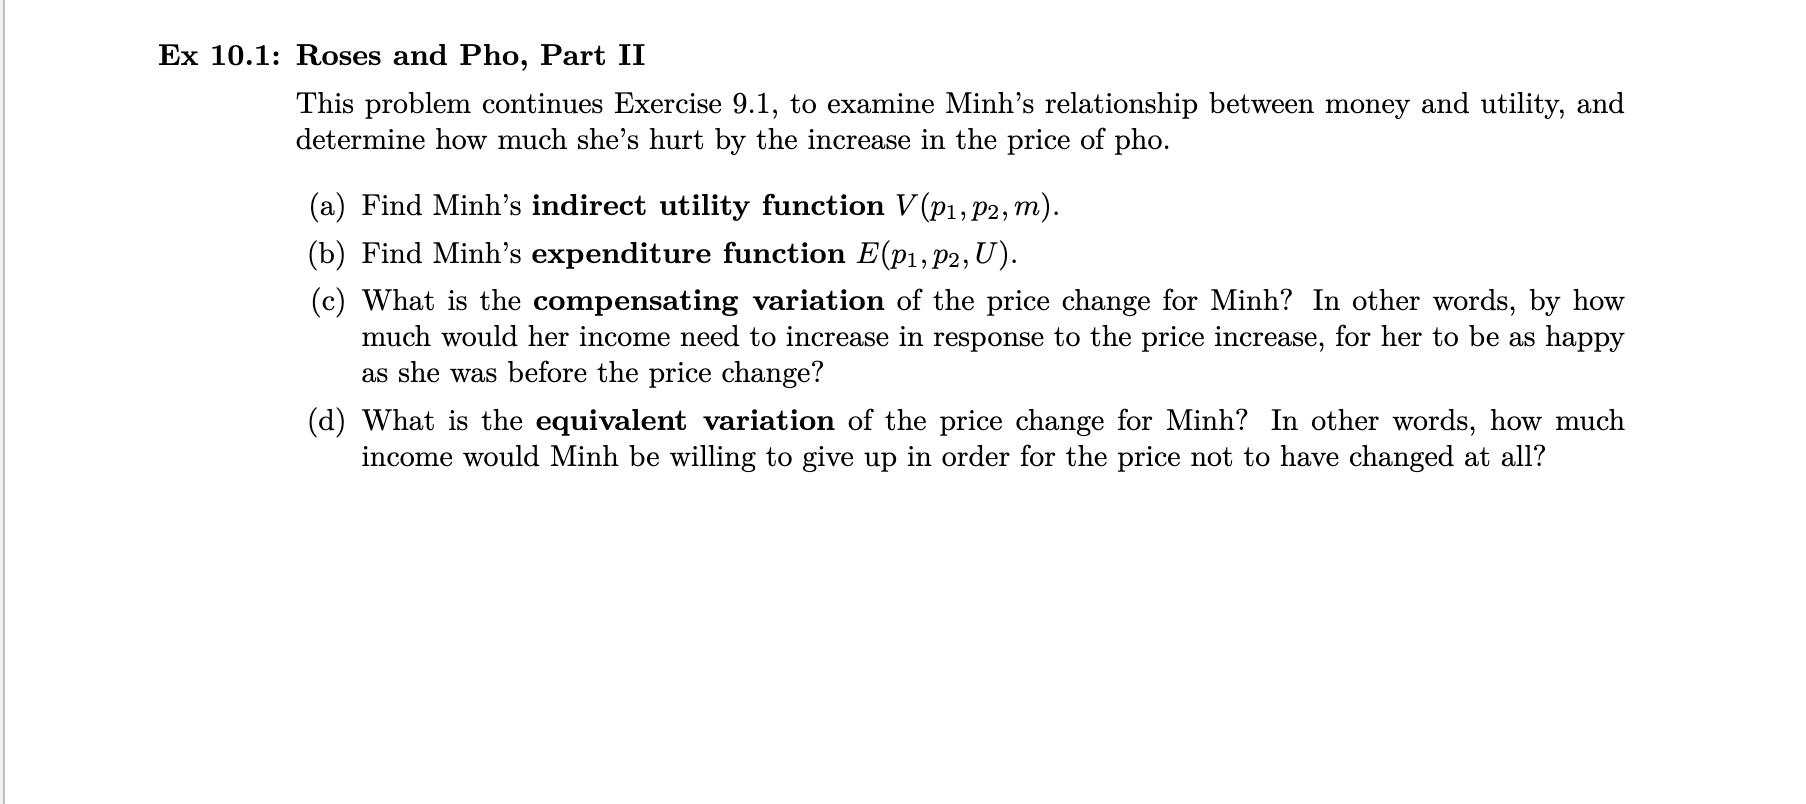 Ex 10.1: Roses and Pho, Part II This problem continues Exercise 9.1, to examine Minh’s relationship between money and utility